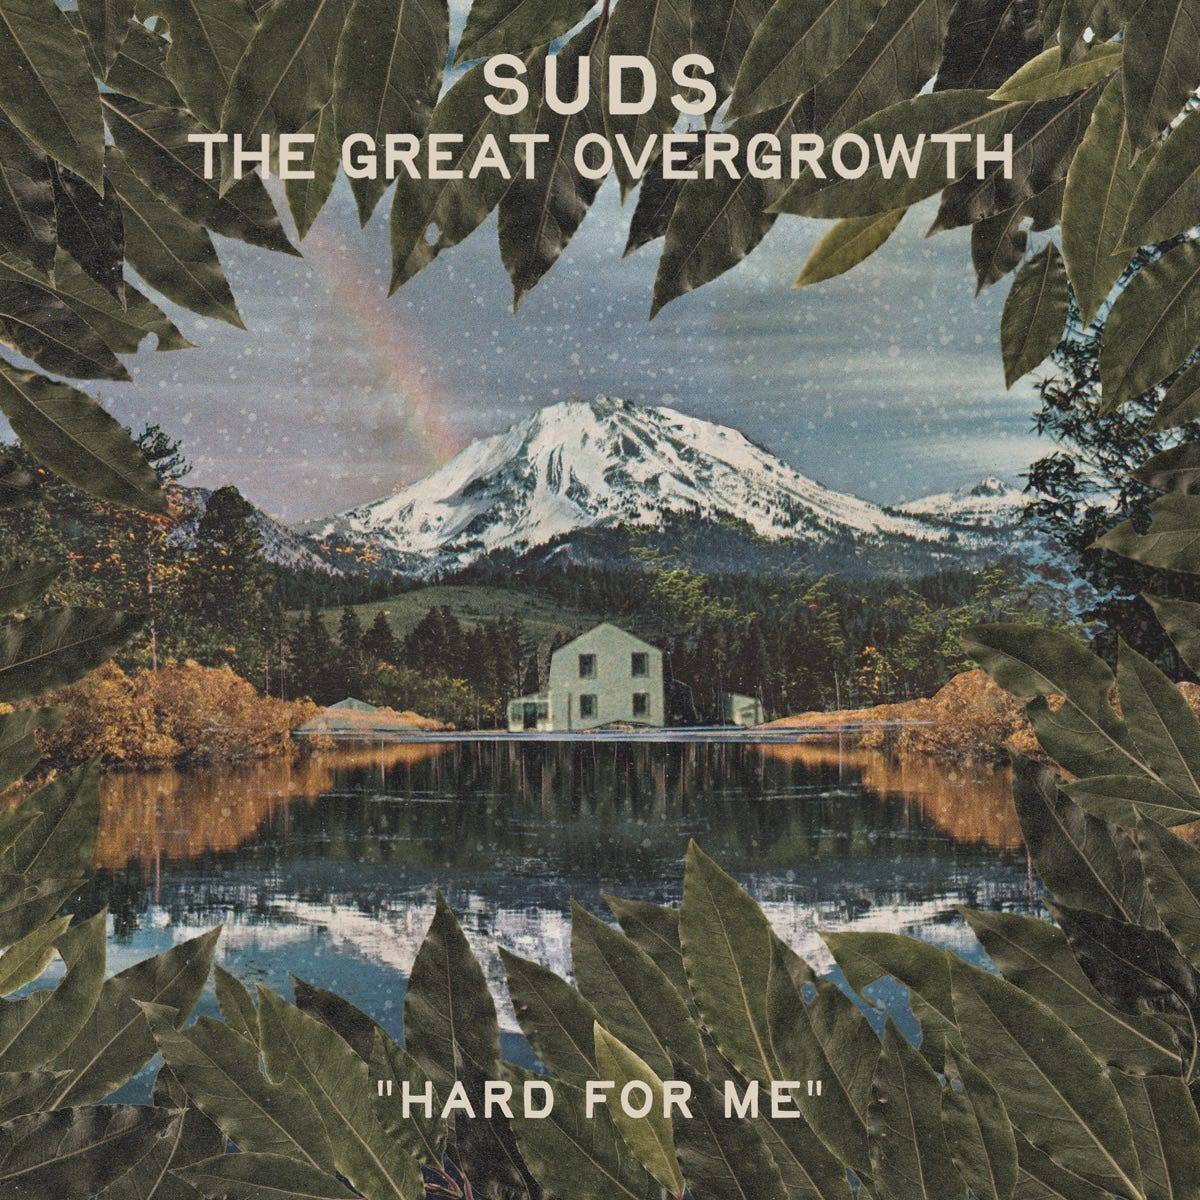 The Great Overgrowth - Album by SUDS - Apple Music